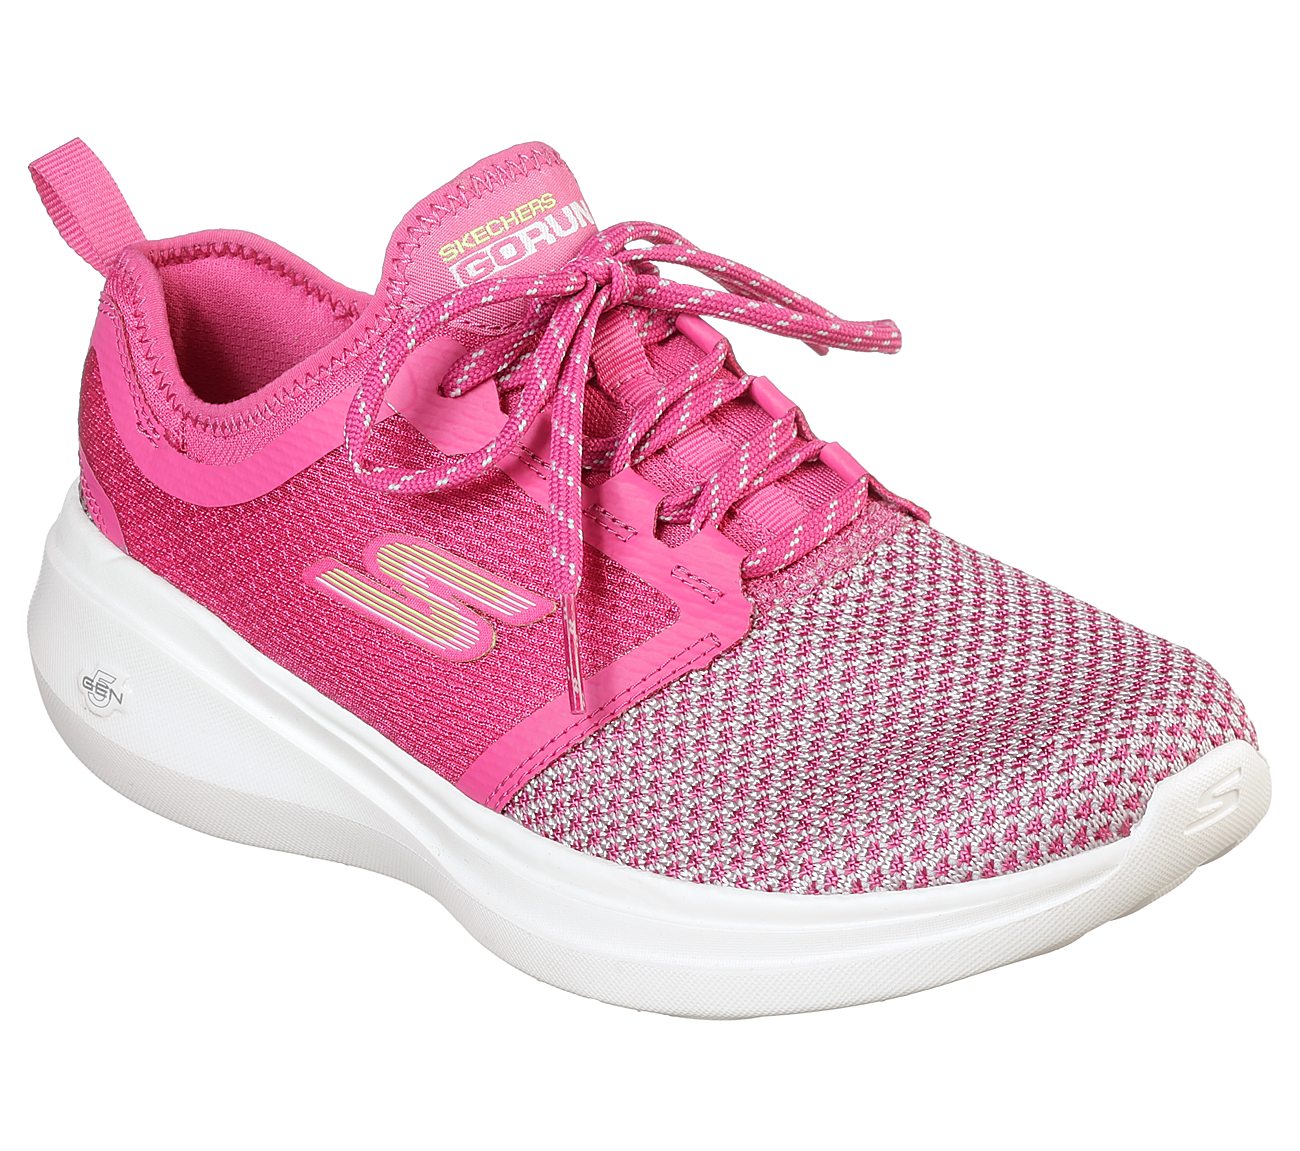 GO RUN FAST-INVIGORATE, HOT PINK/LIME Footwear Lateral View